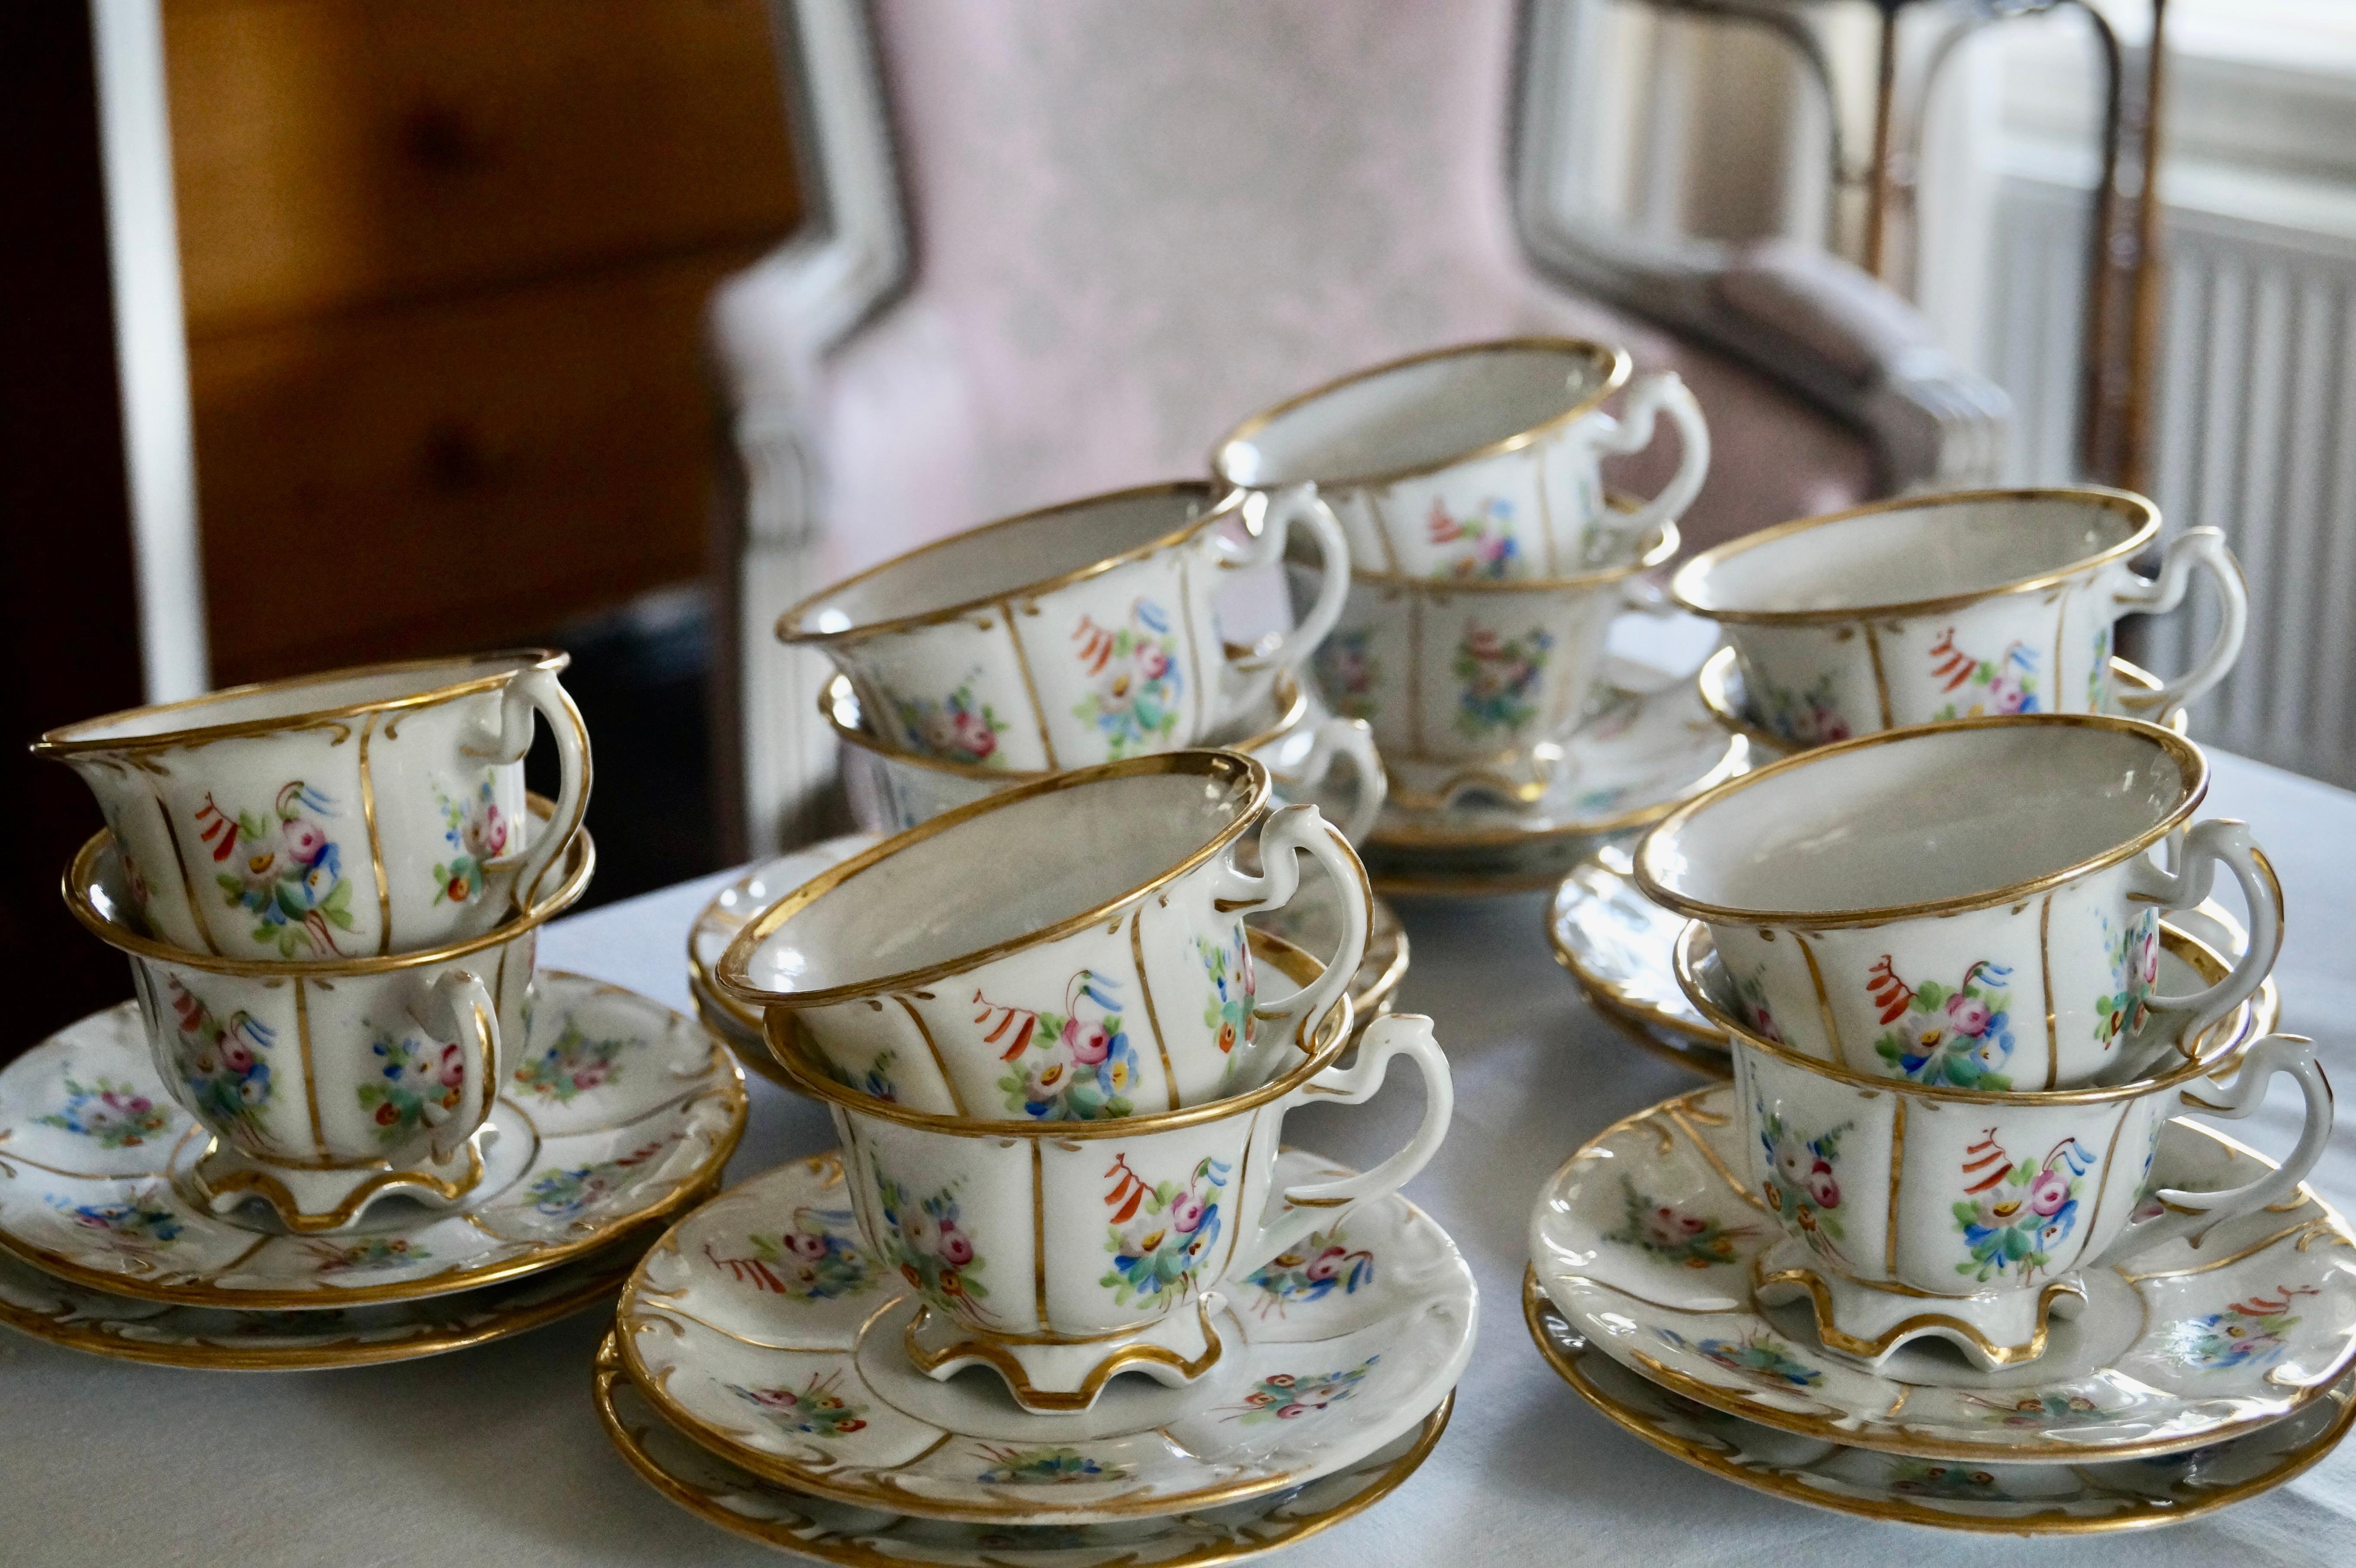 Beautiful antique hand painted Old Paris porcelain Coffee tea service from 1860-1880

Handpainted with flowers and finessed with gold decoration. 

Good condition for its age, there are some gold wear in each pieces of the service. (4 saucers have